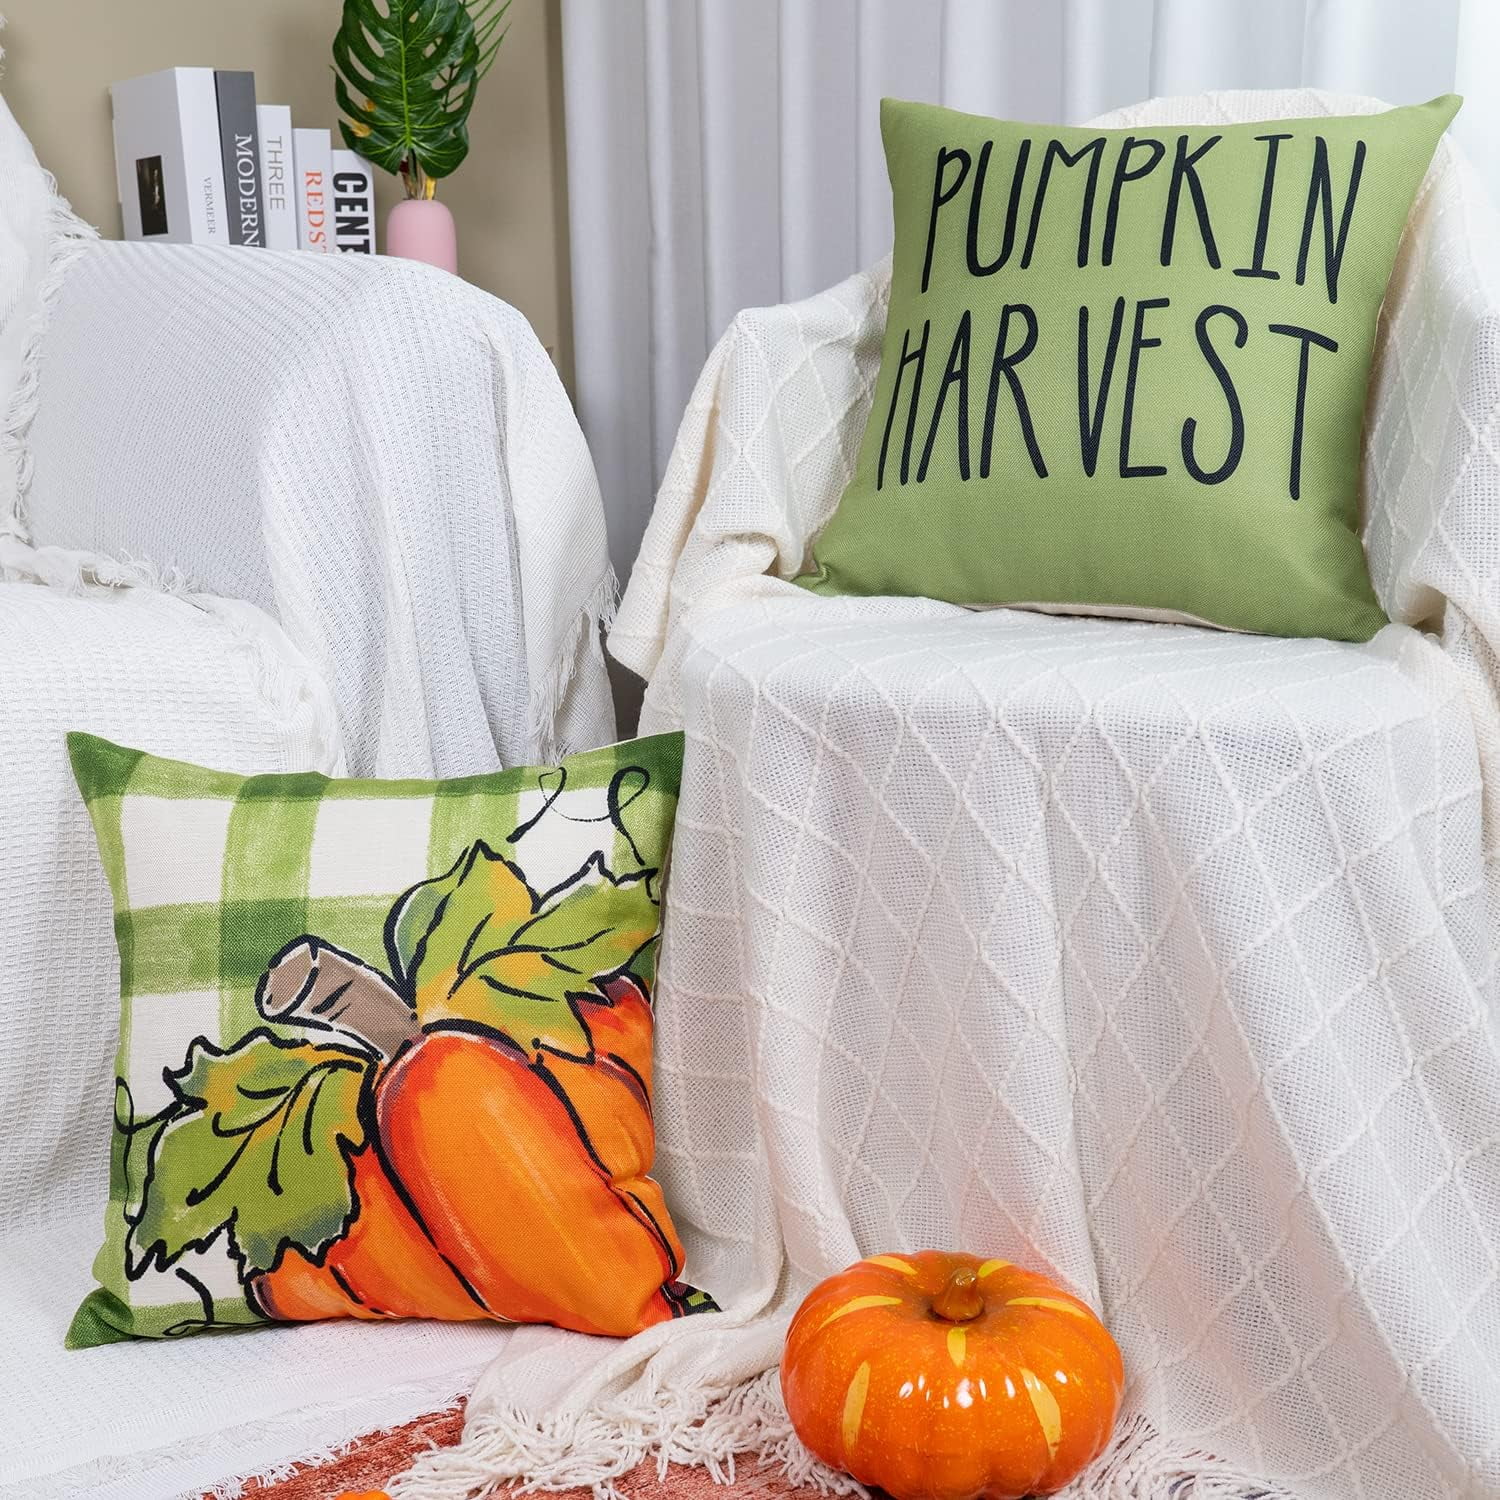 Fall Pumpkin Pillow Covers 18x18 Inch Set of 2 Watercolor Gray Orange White  Autumn Harvest Decorative Outdoor Throw Pillows Rustic Pillow Case Linen